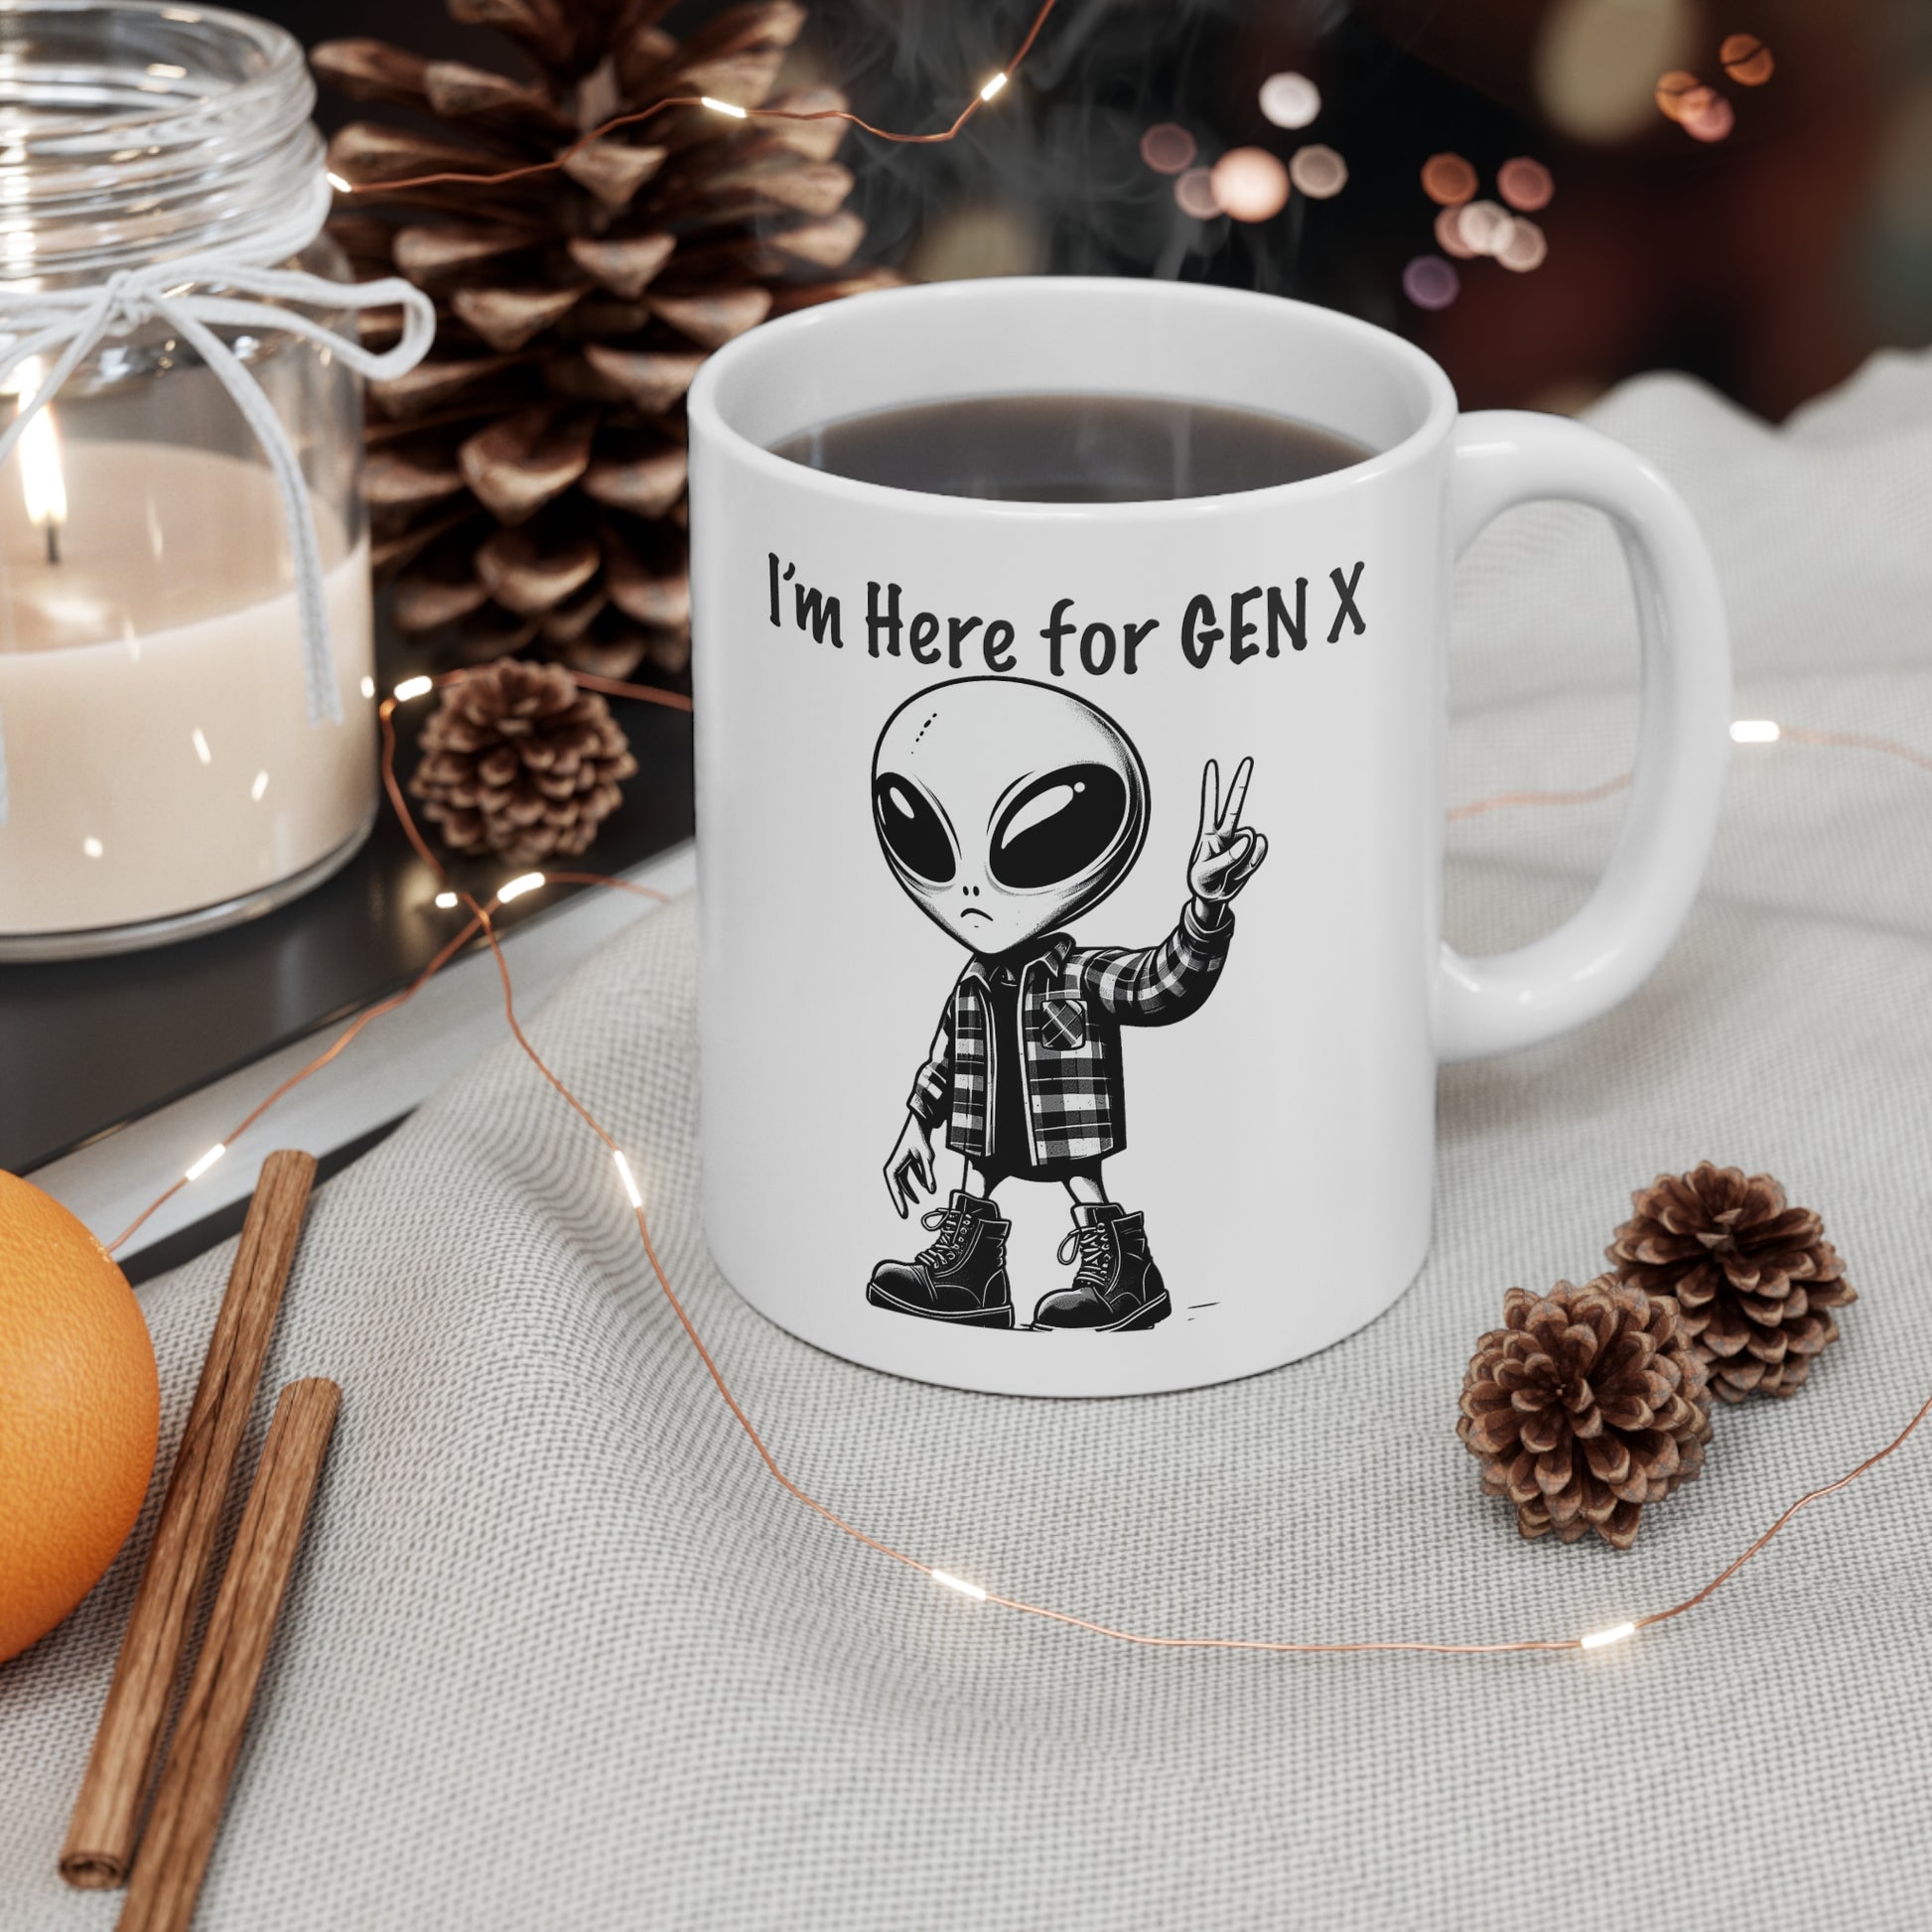  this mug that features an alien with combat boots and a flannel shirt, flashing a peace sign, saying “I’m here for Gen X”.